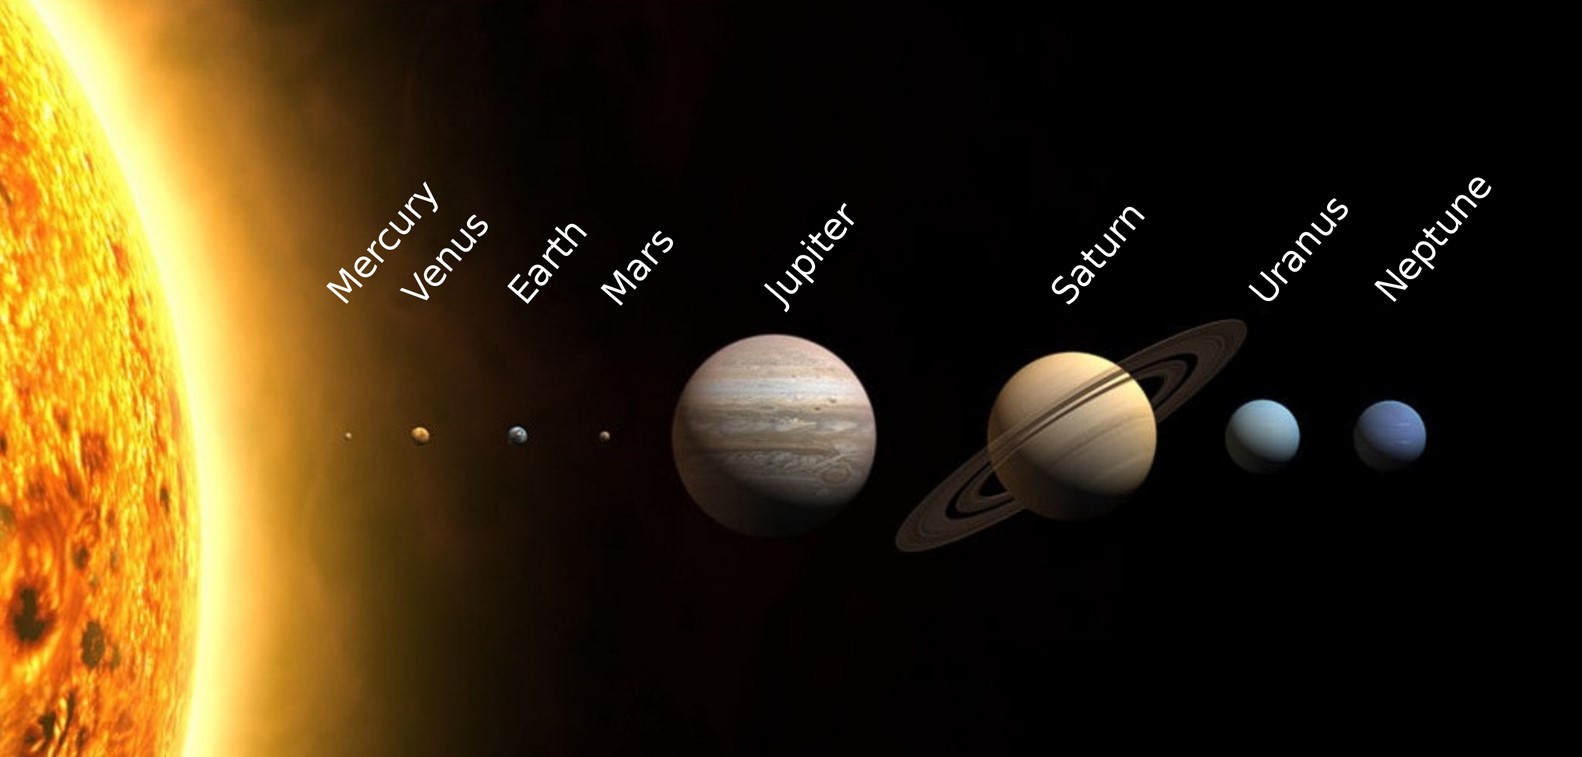 Planets depicted in order of size and distance from the sun